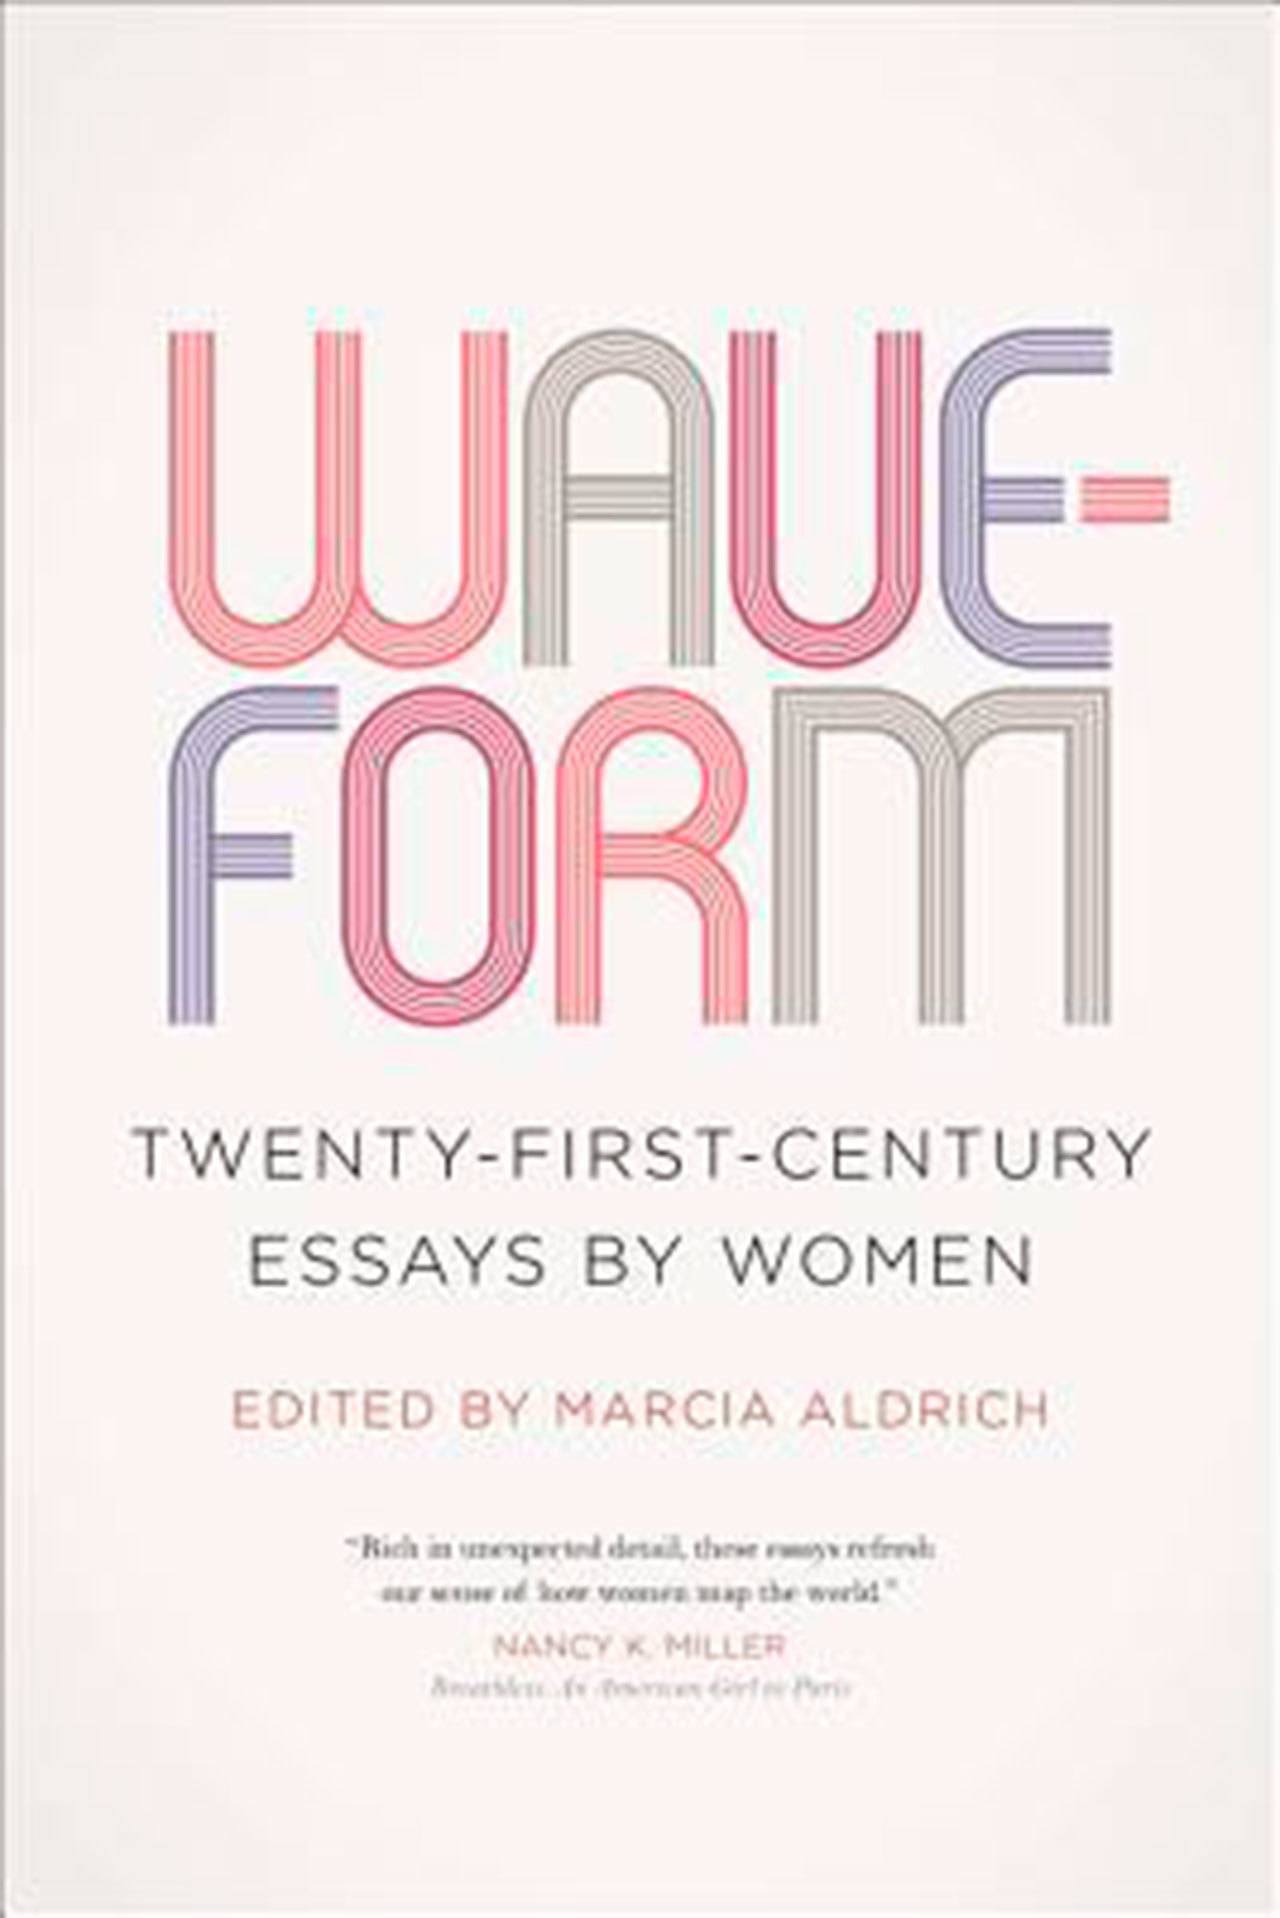 Image courtesy of Eagle Harbor Book Company | A special author event highlighting a recent collection of essays by women, “Waveform: Twenty-first-Century Essays by Women,” will be held at Eagle Harbor Book Company at 3 p.m. Sunday, Feb. 26. Editor Marcia Aldrich will talk with one of her contributors, writer and teacher Brenda Miller.